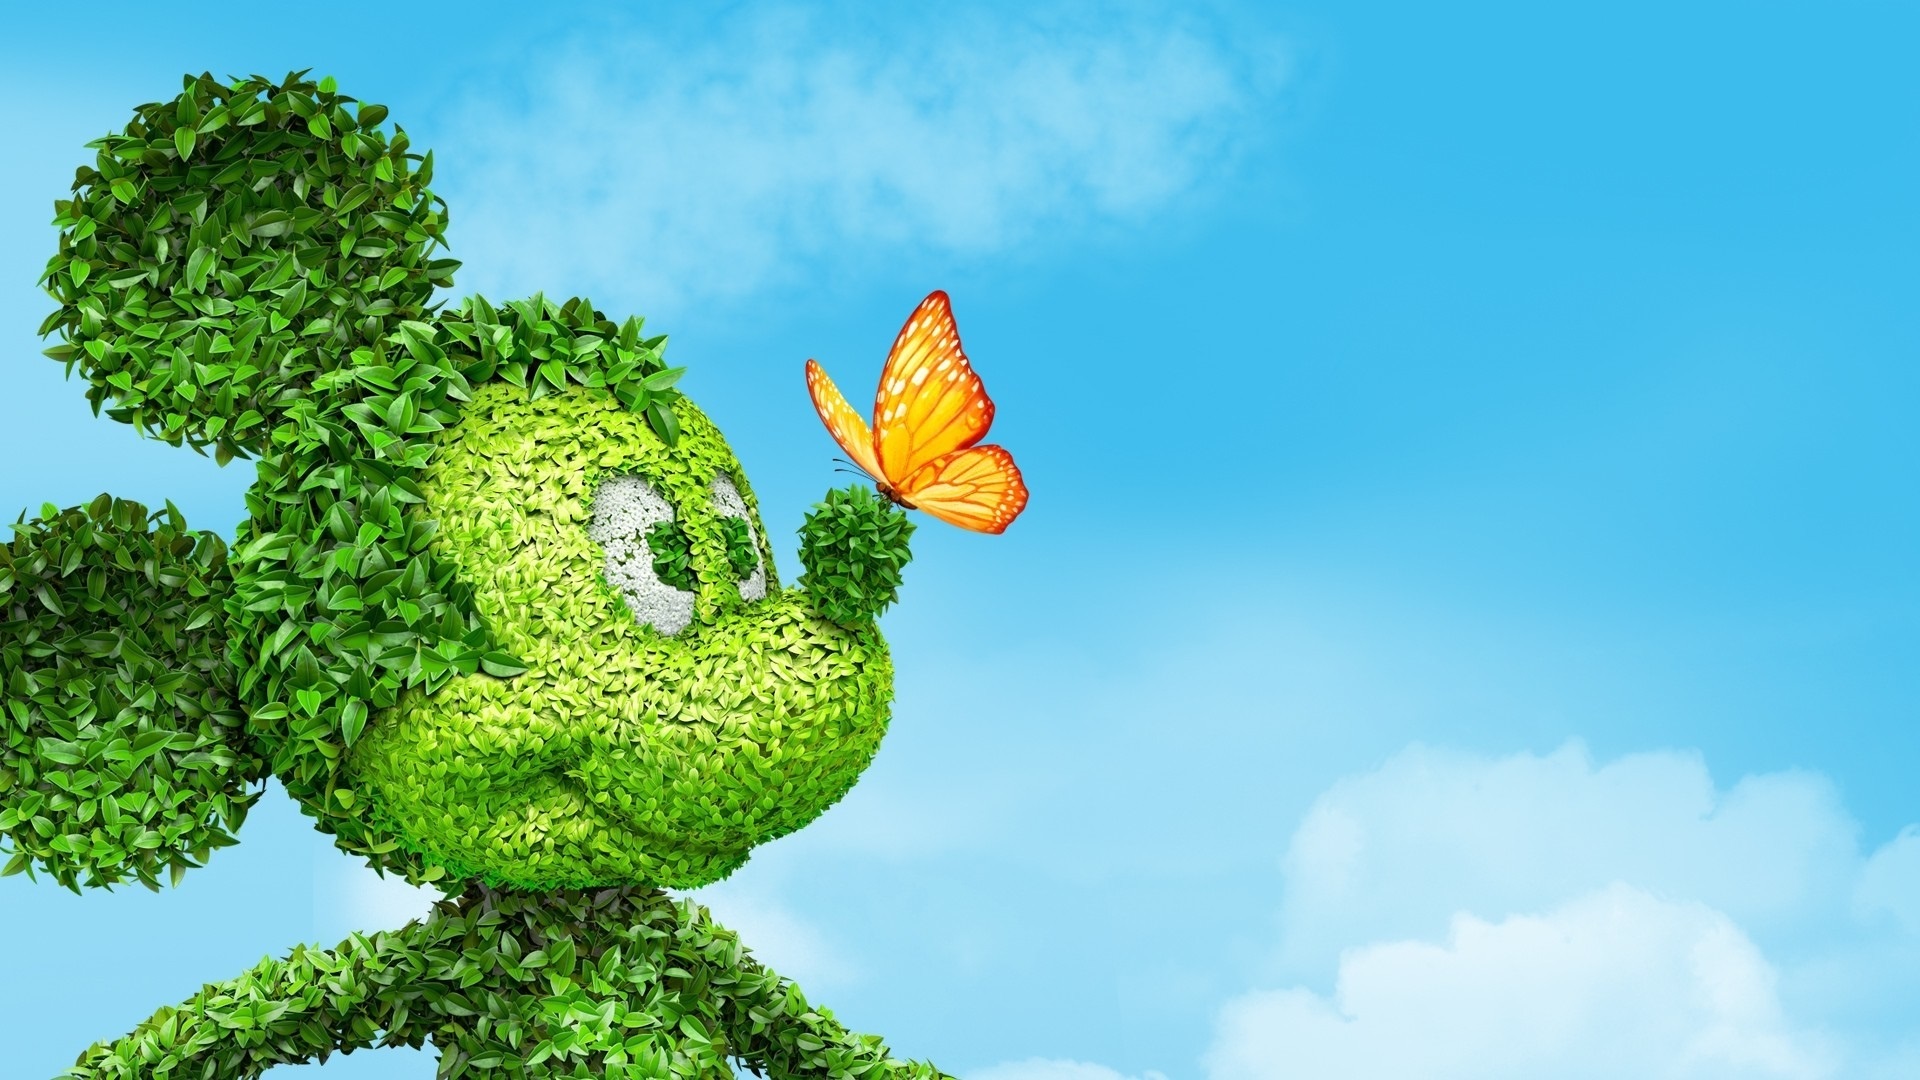 Wallpaper Mickey Mouse, Leaves, Butterfly, Blue Sky - Mickey Mouse Wallpaper Green - HD Wallpaper 